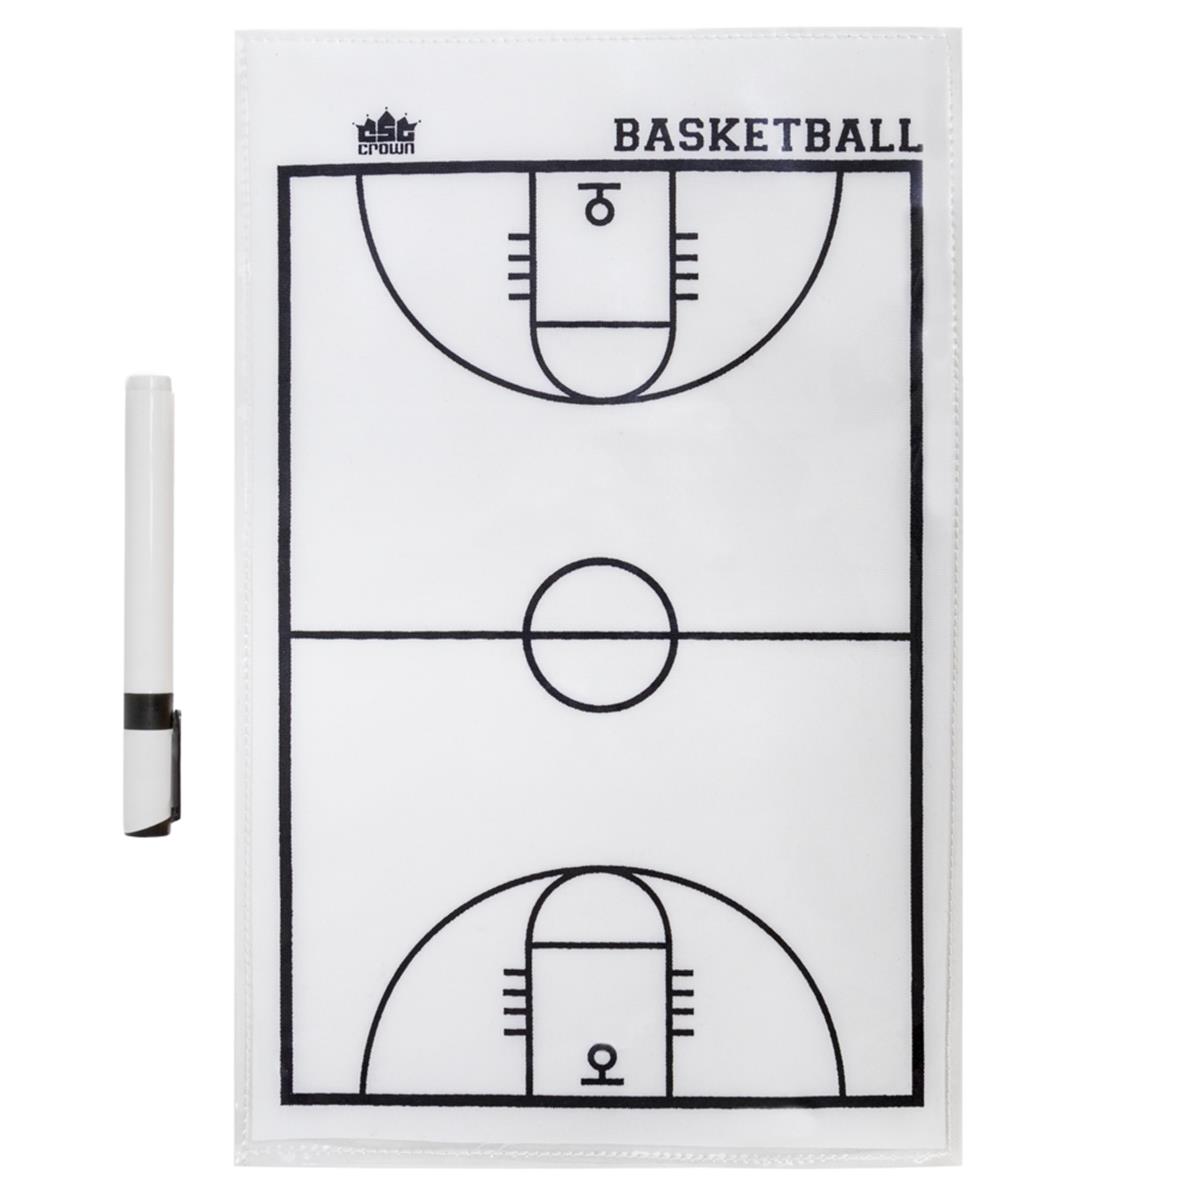 Picture of Brybelly SCOA-407 Roll-up Clipboard- Basketball